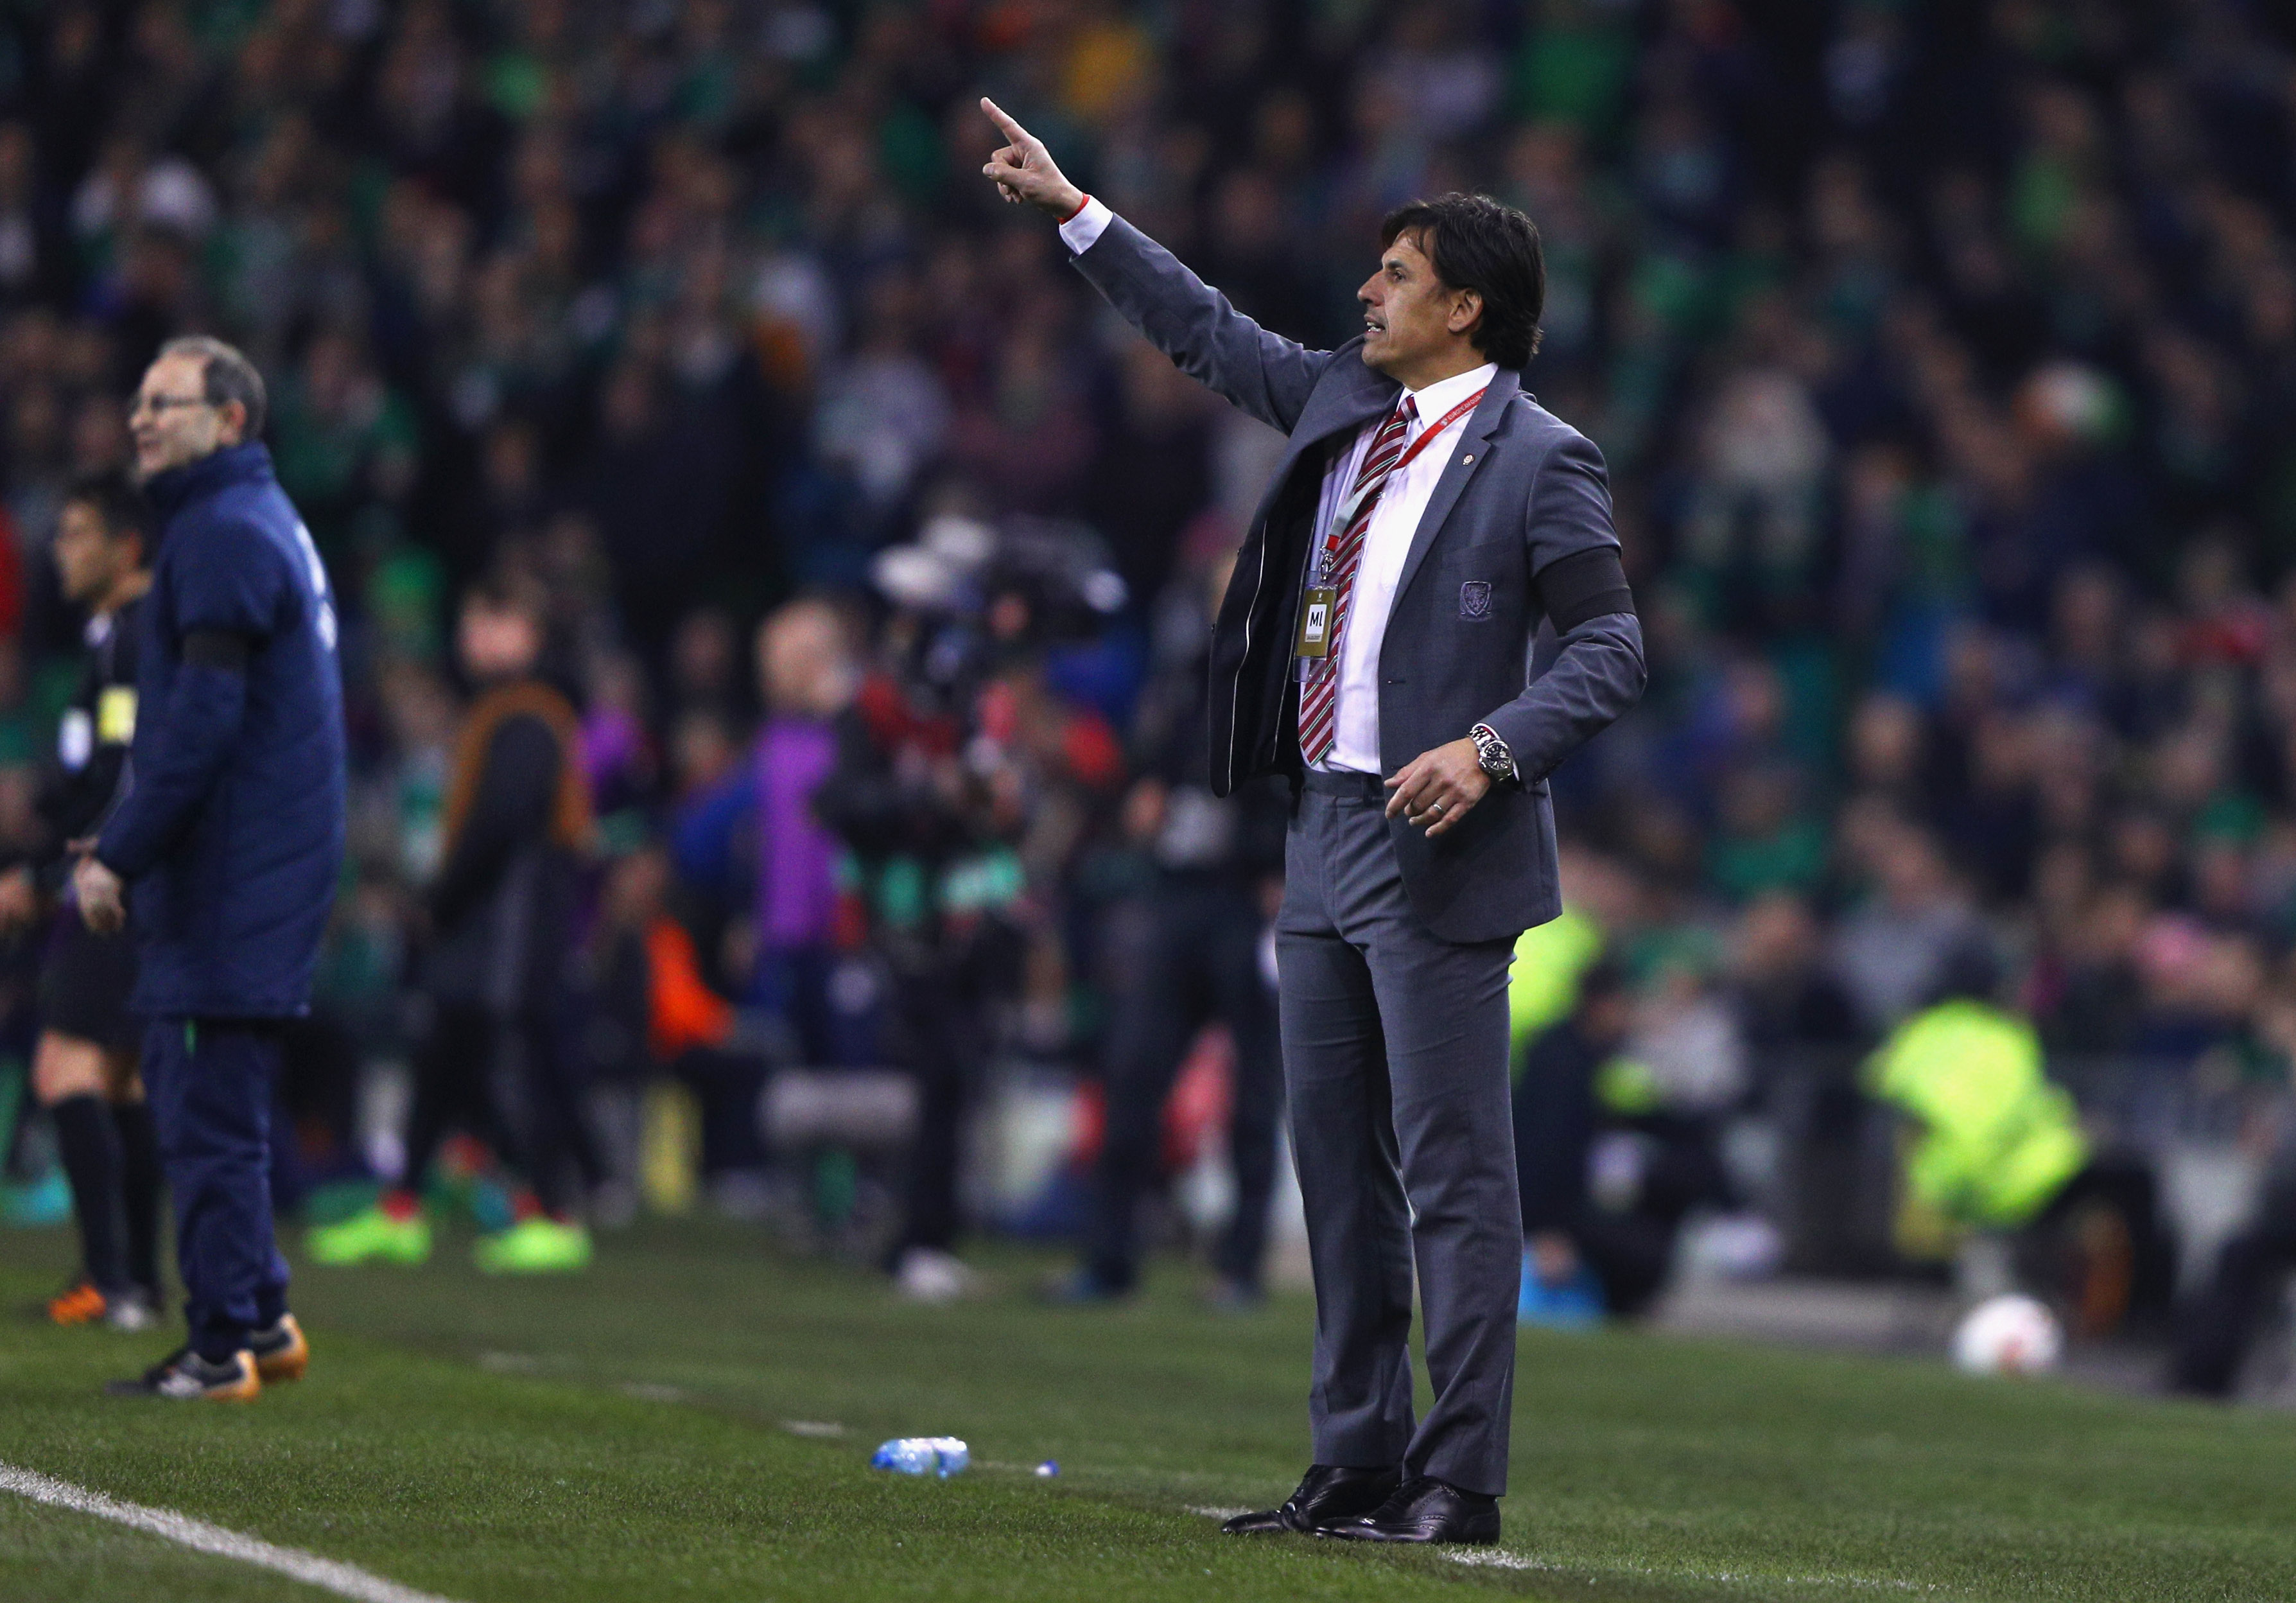 DUBLIN, IRELAND - MARCH 24:  Chris Coleman manager of Wales gives instructions during the FIFA 2018 World Cup Qualifier between Republic of Ireland and Wales at Aviva Stadium on March 24, 2017 in Dublin, Ireland.  (Photo by Ian Walton/Getty Images)